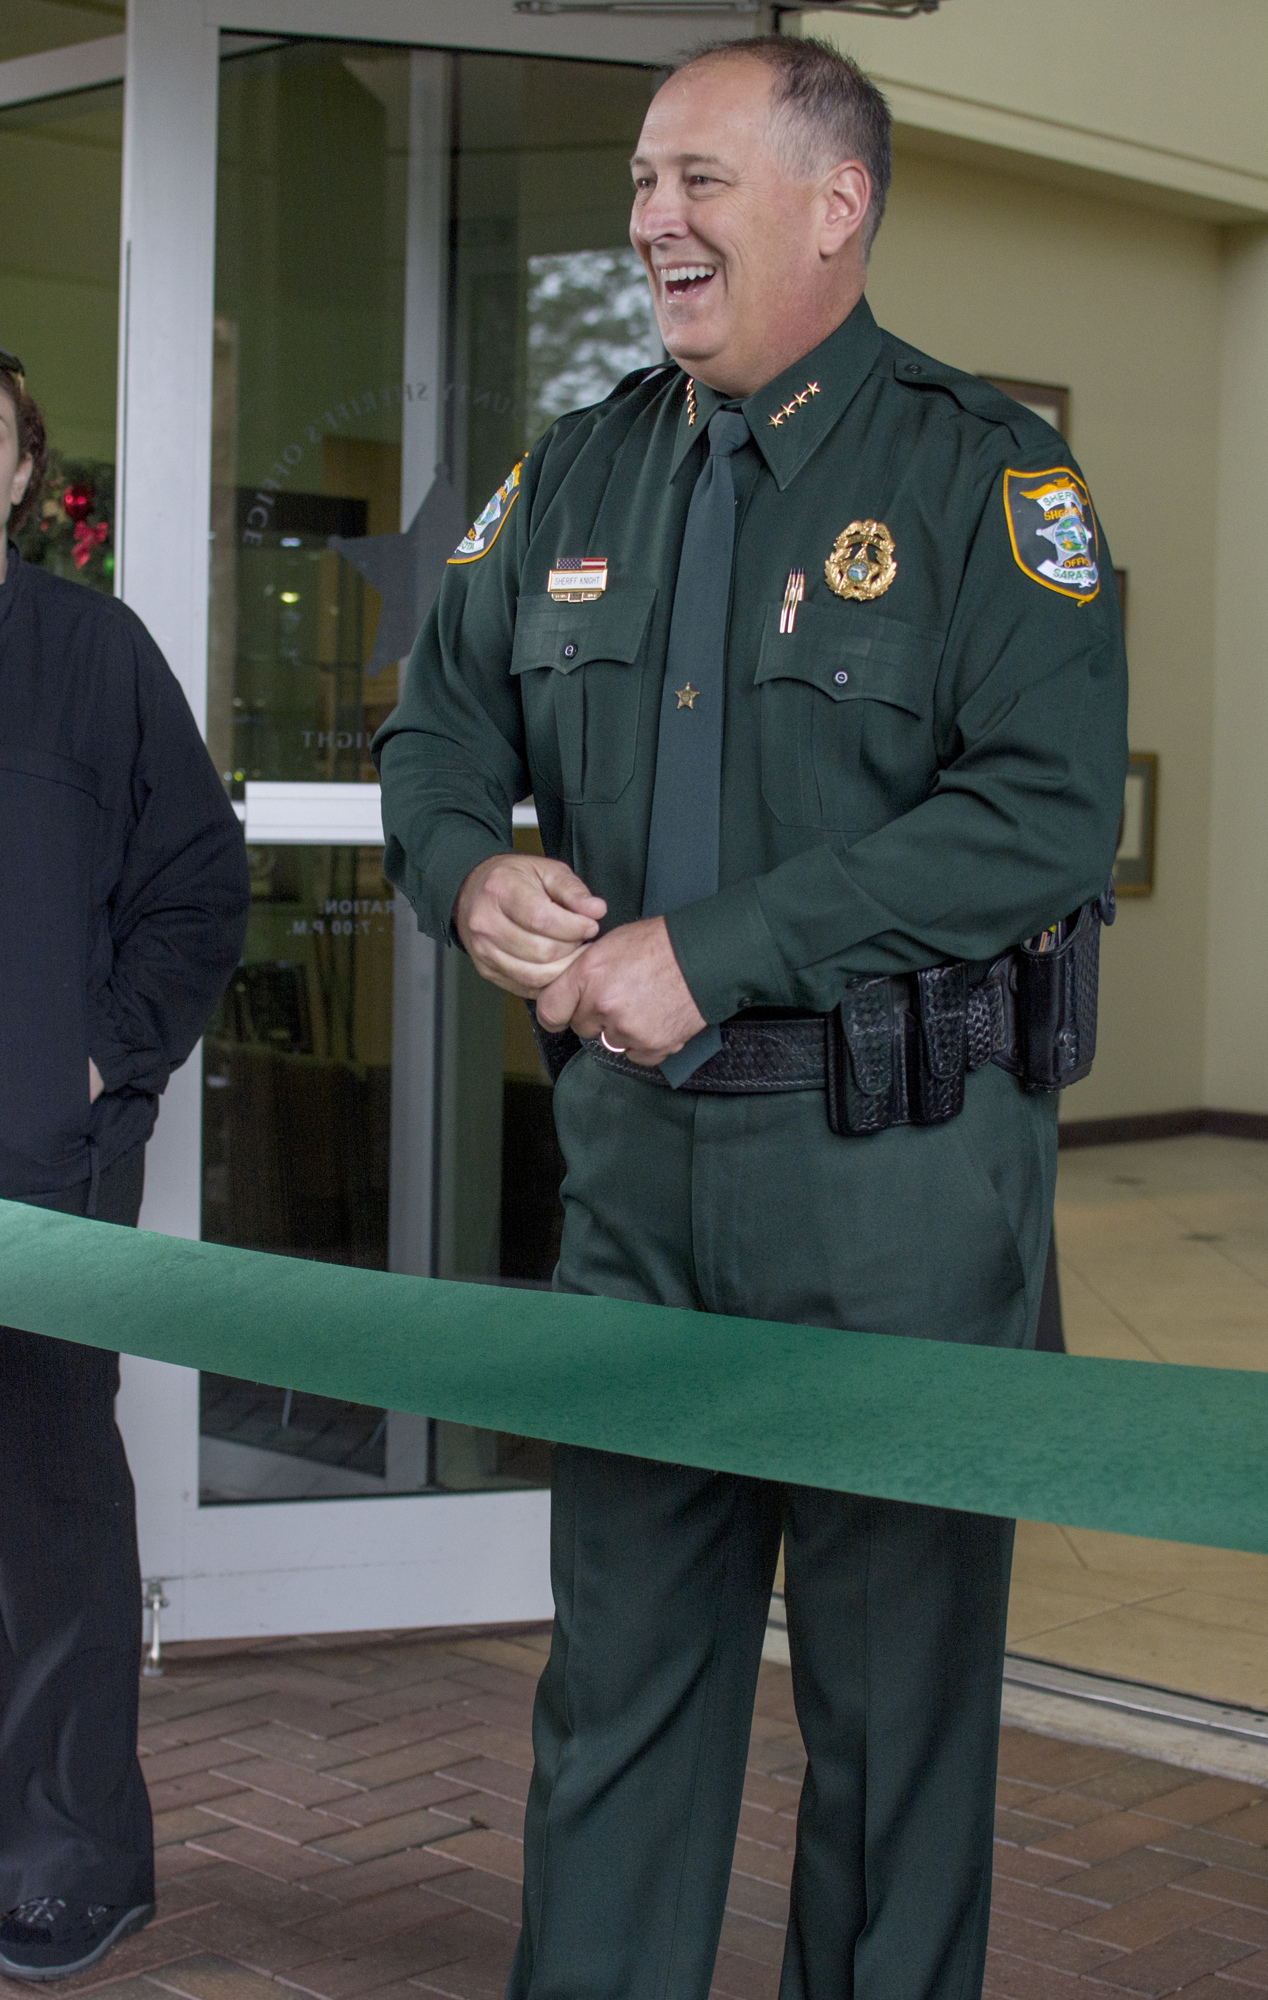 Sheriff Tom Knight welcomes eventgoers to the ribbon cutting event.